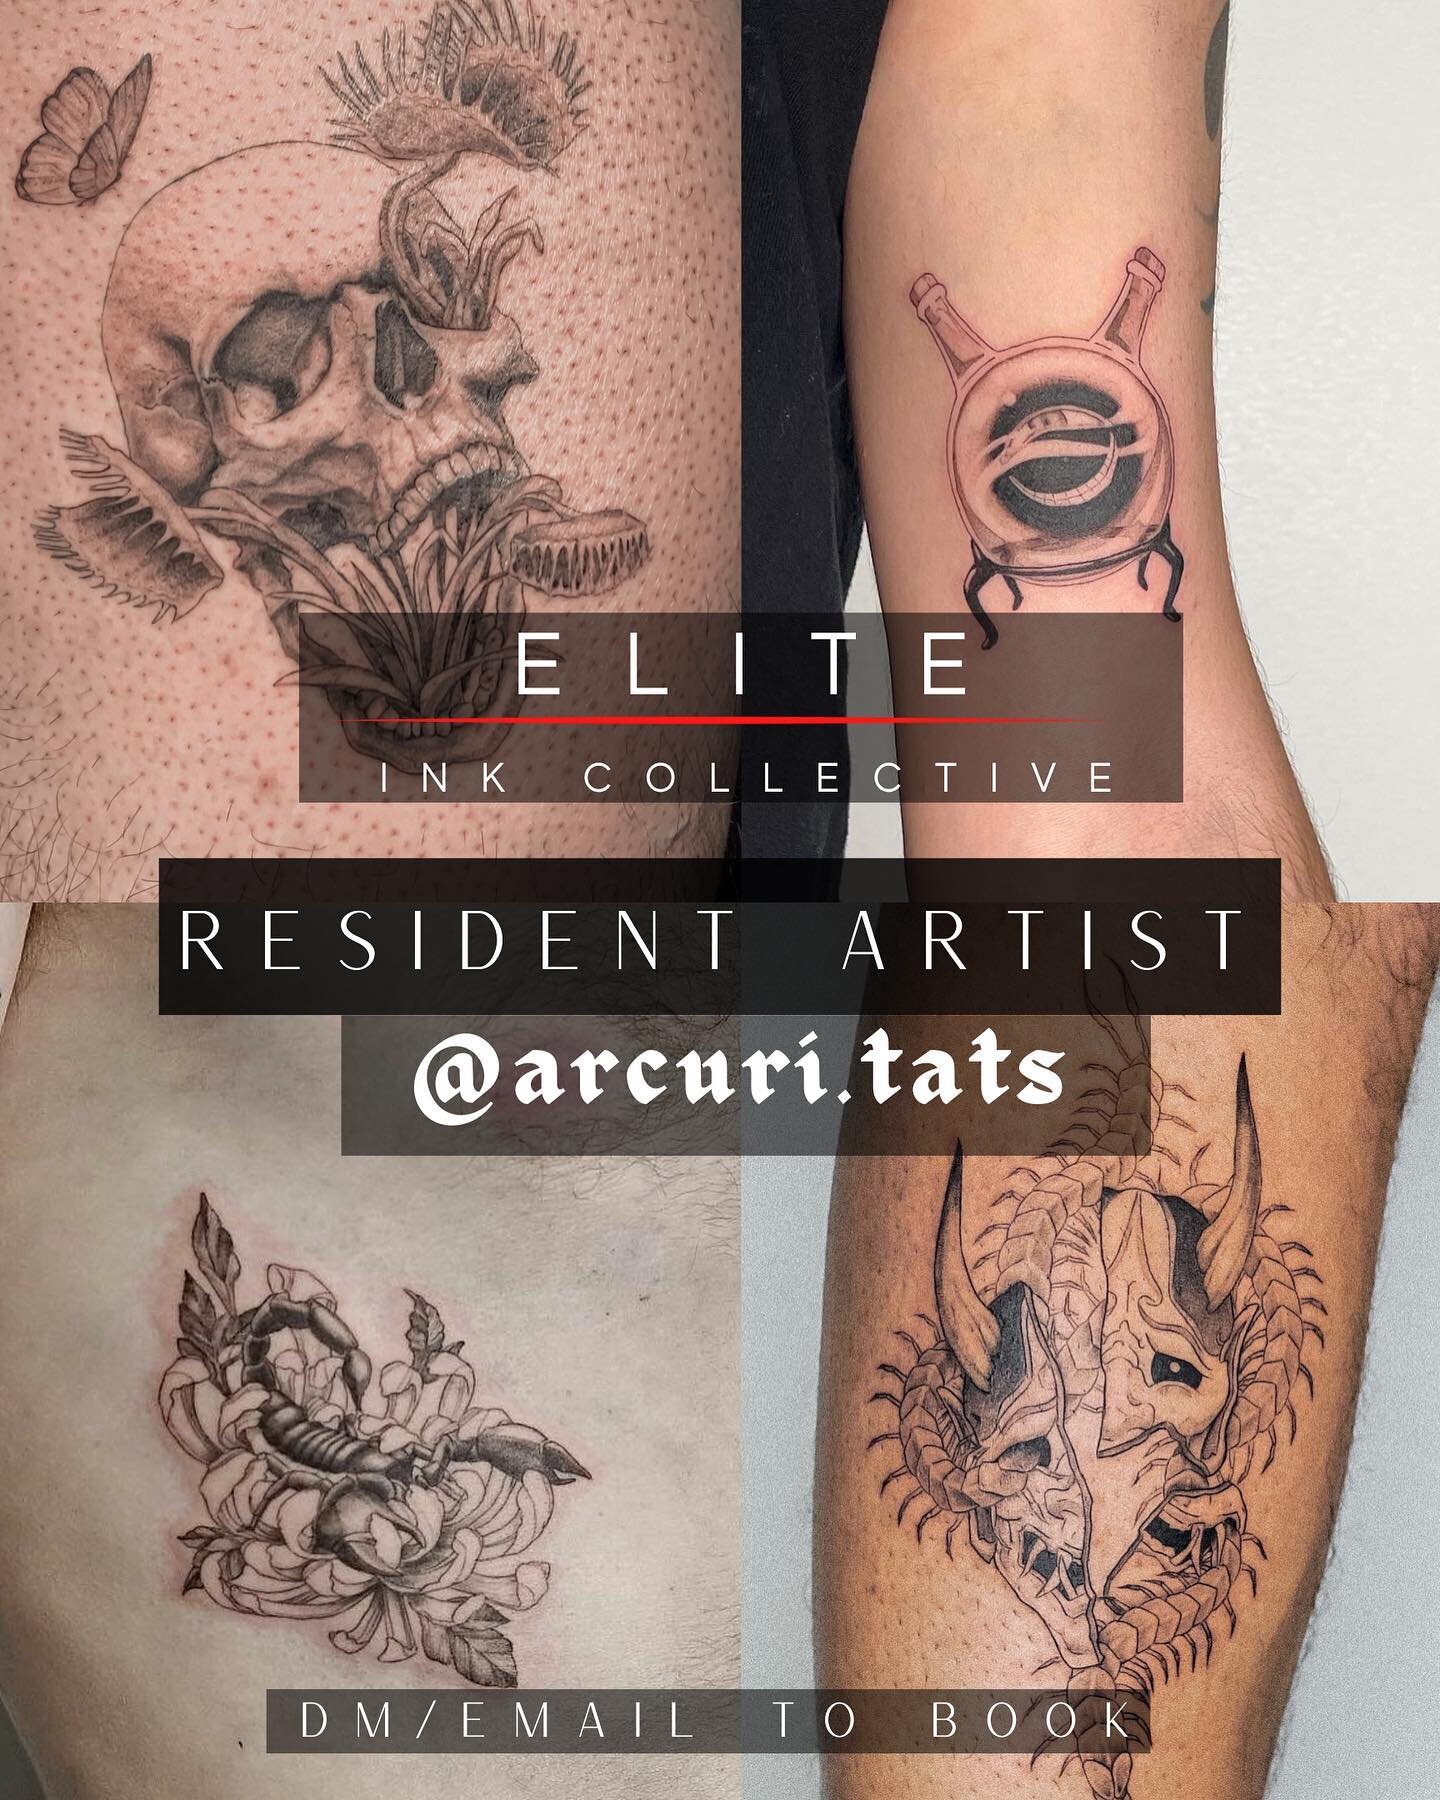 🚨 Resident Artist Alert!🚨 @arcuri.tats will be joining Elite Ink Collective as a resident junior artist starting today. Check out her profile 🙏🏼 @arcuri.tats . She has been our apprentice for some time now and has finally graduated to Junior Arti